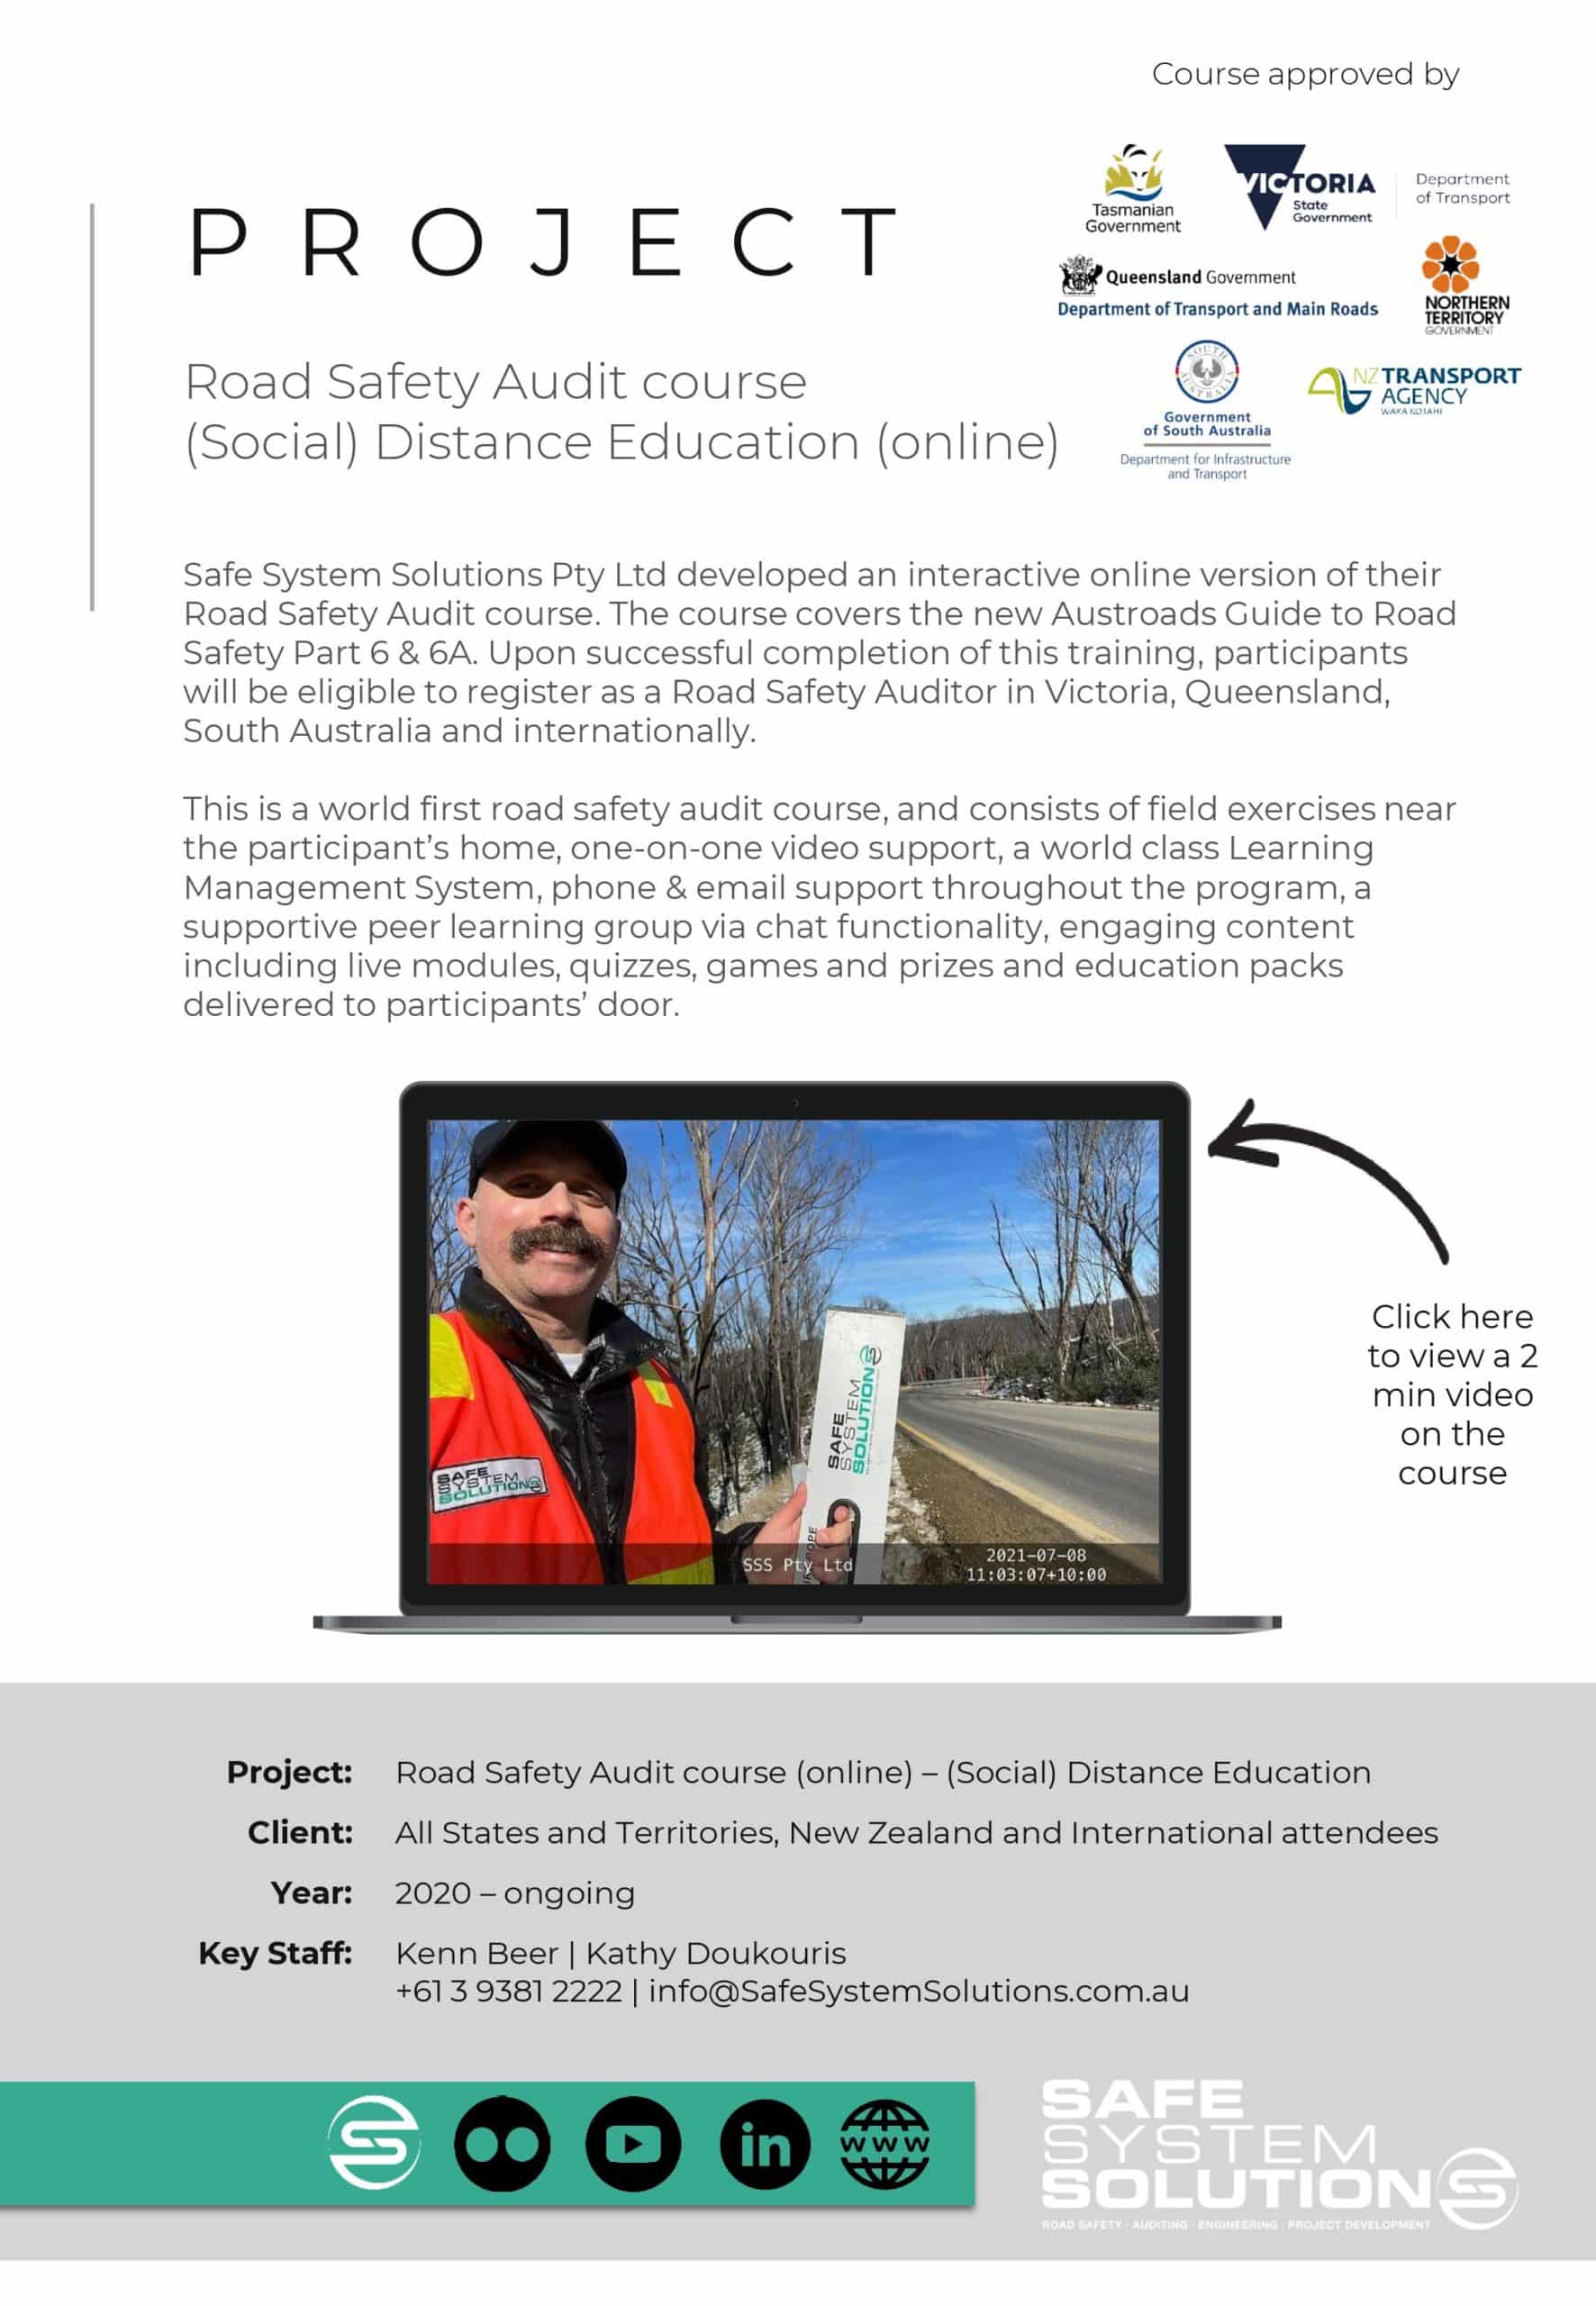 Road Safety Audit course (Social) Distance Education (online)